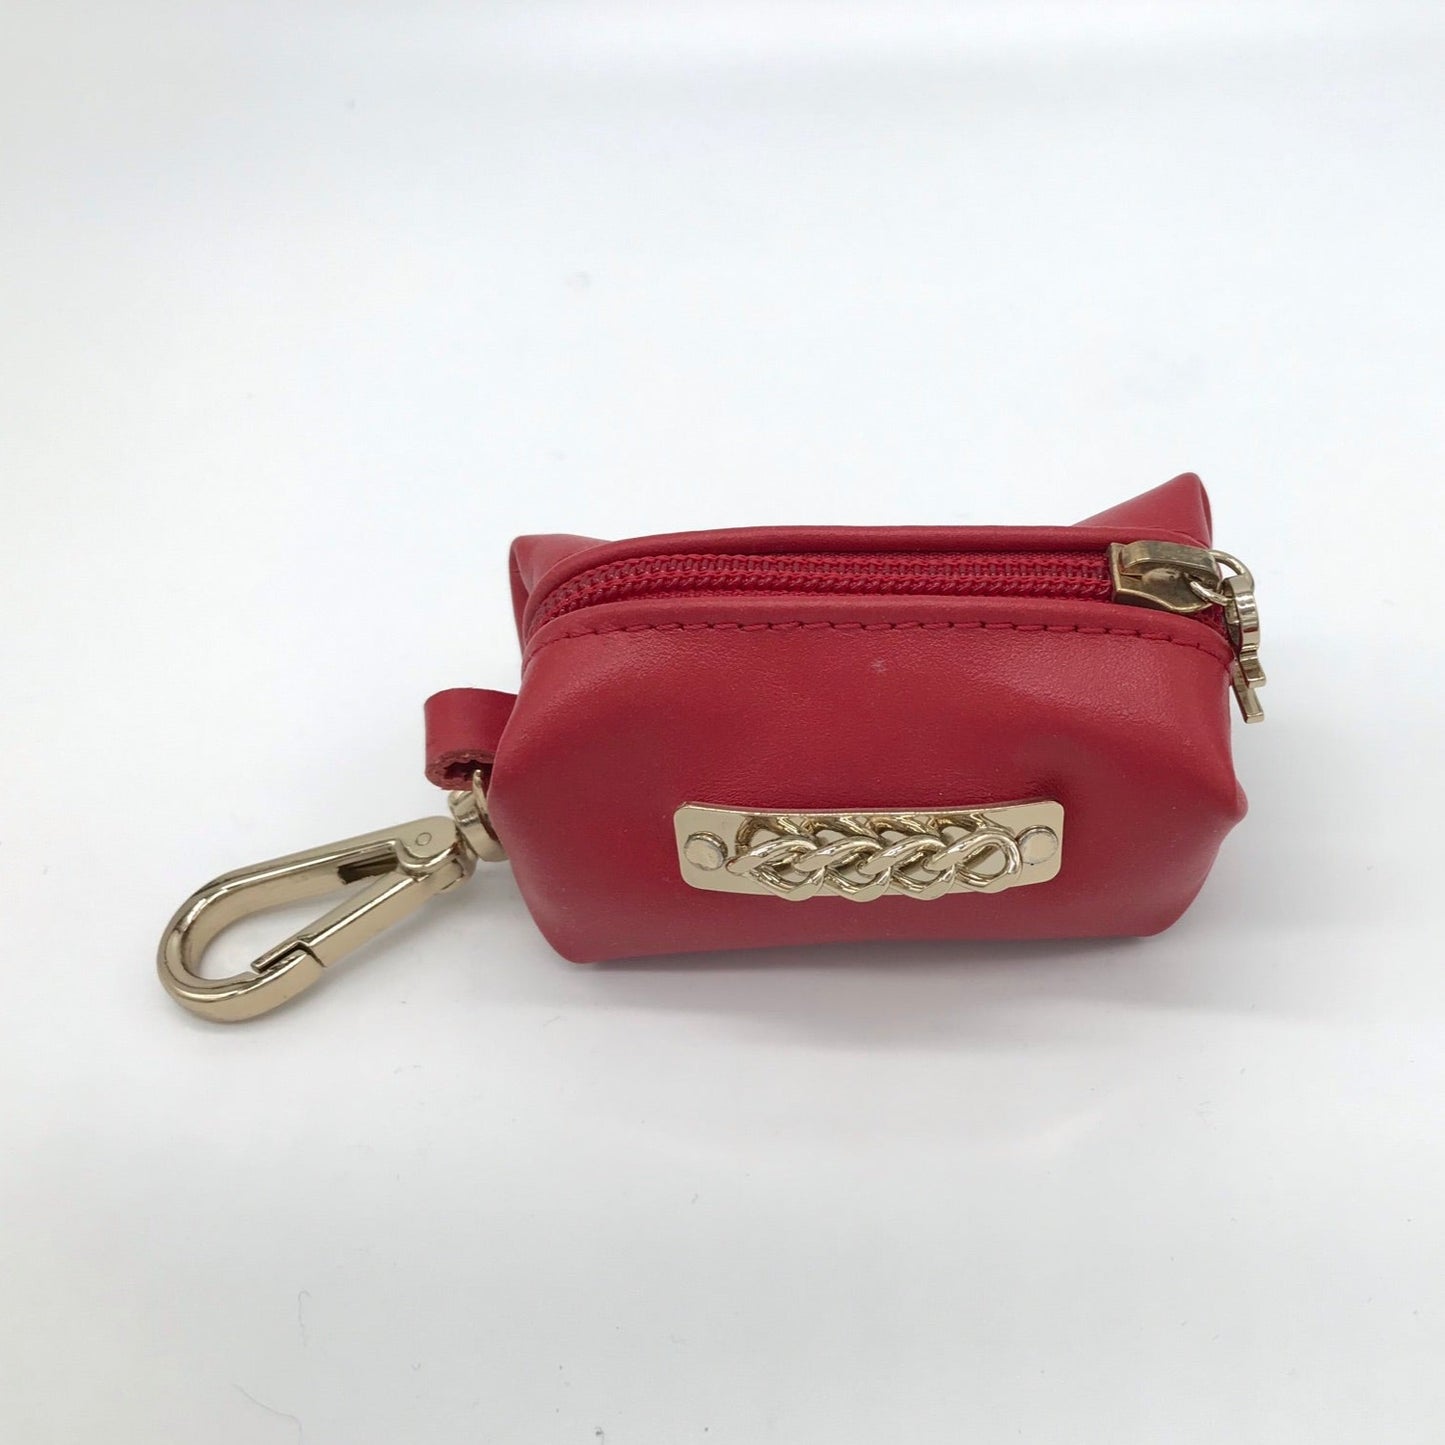 Leather pouch holder with golden chain Lipstick